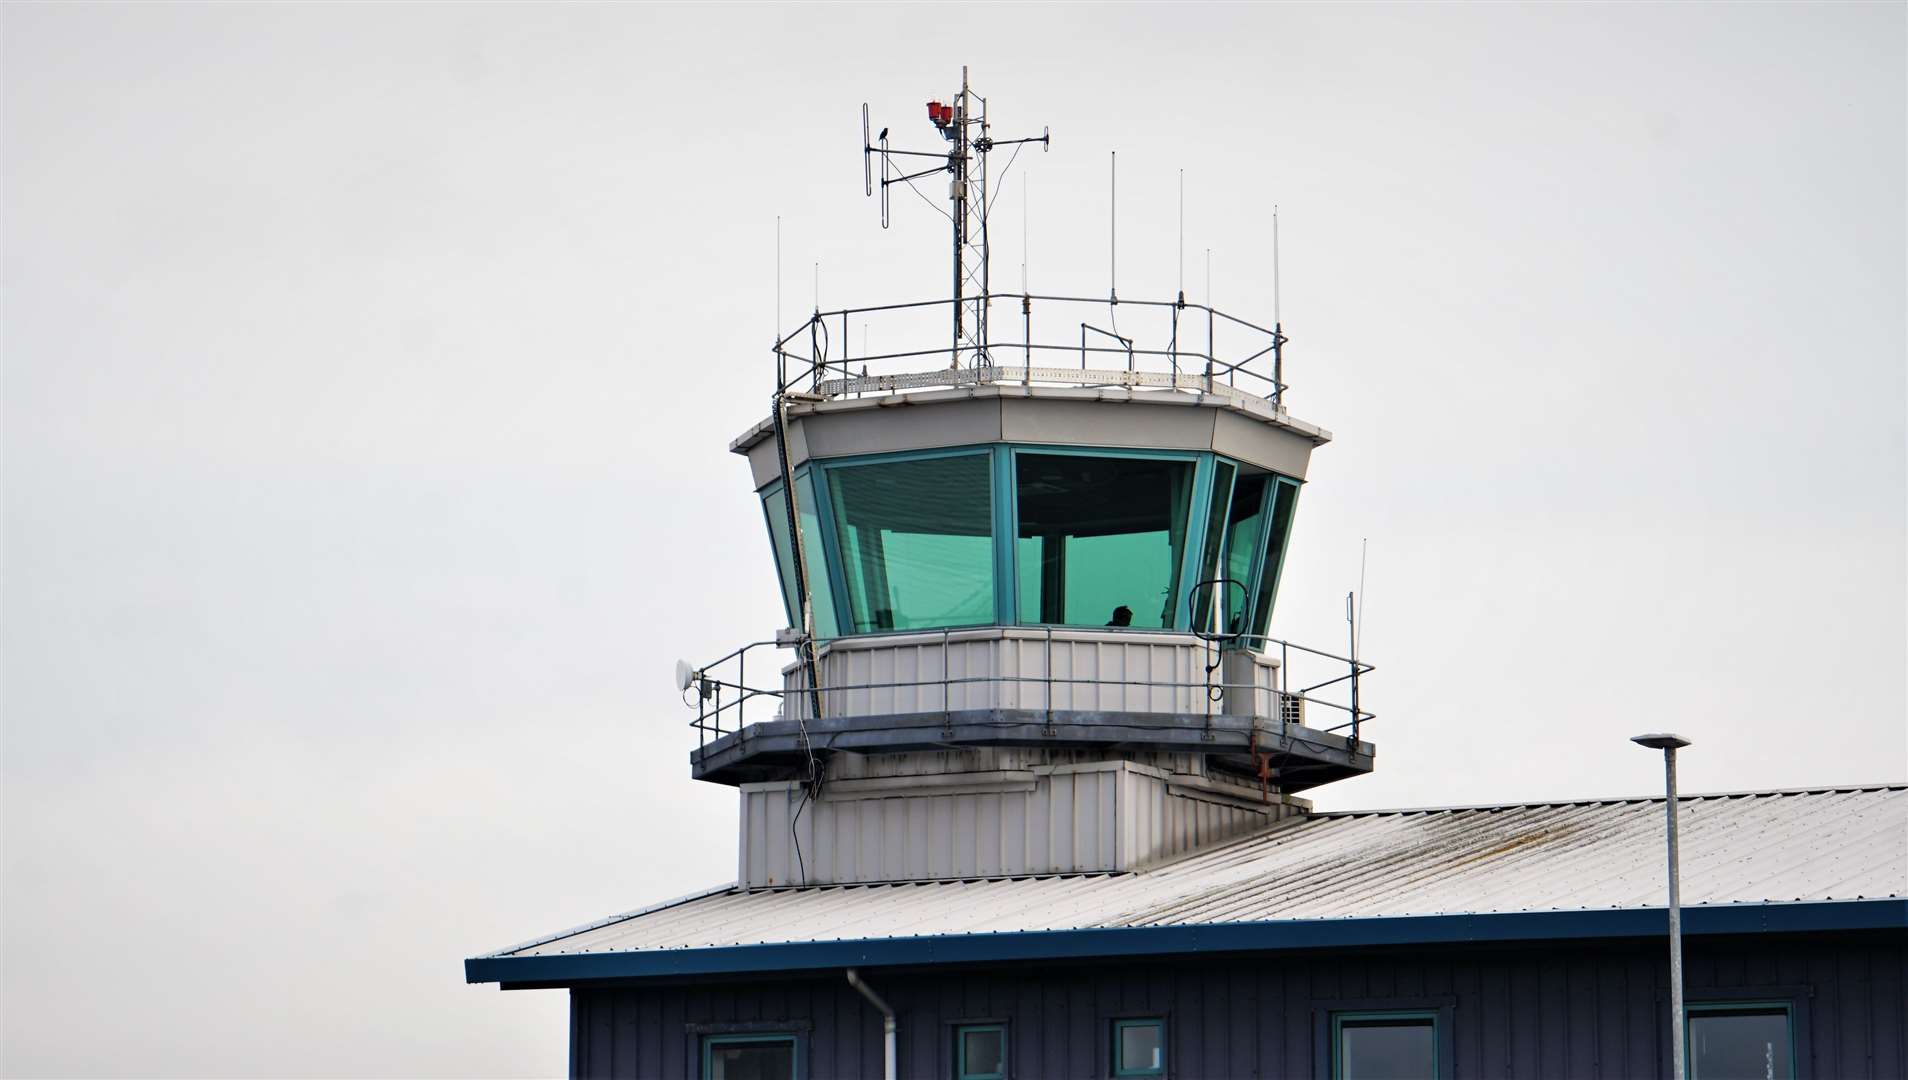 Wick John O'Groats Airport is one of two HIAL airports which will be downgraded from having its own air traffic service to a flight information service.